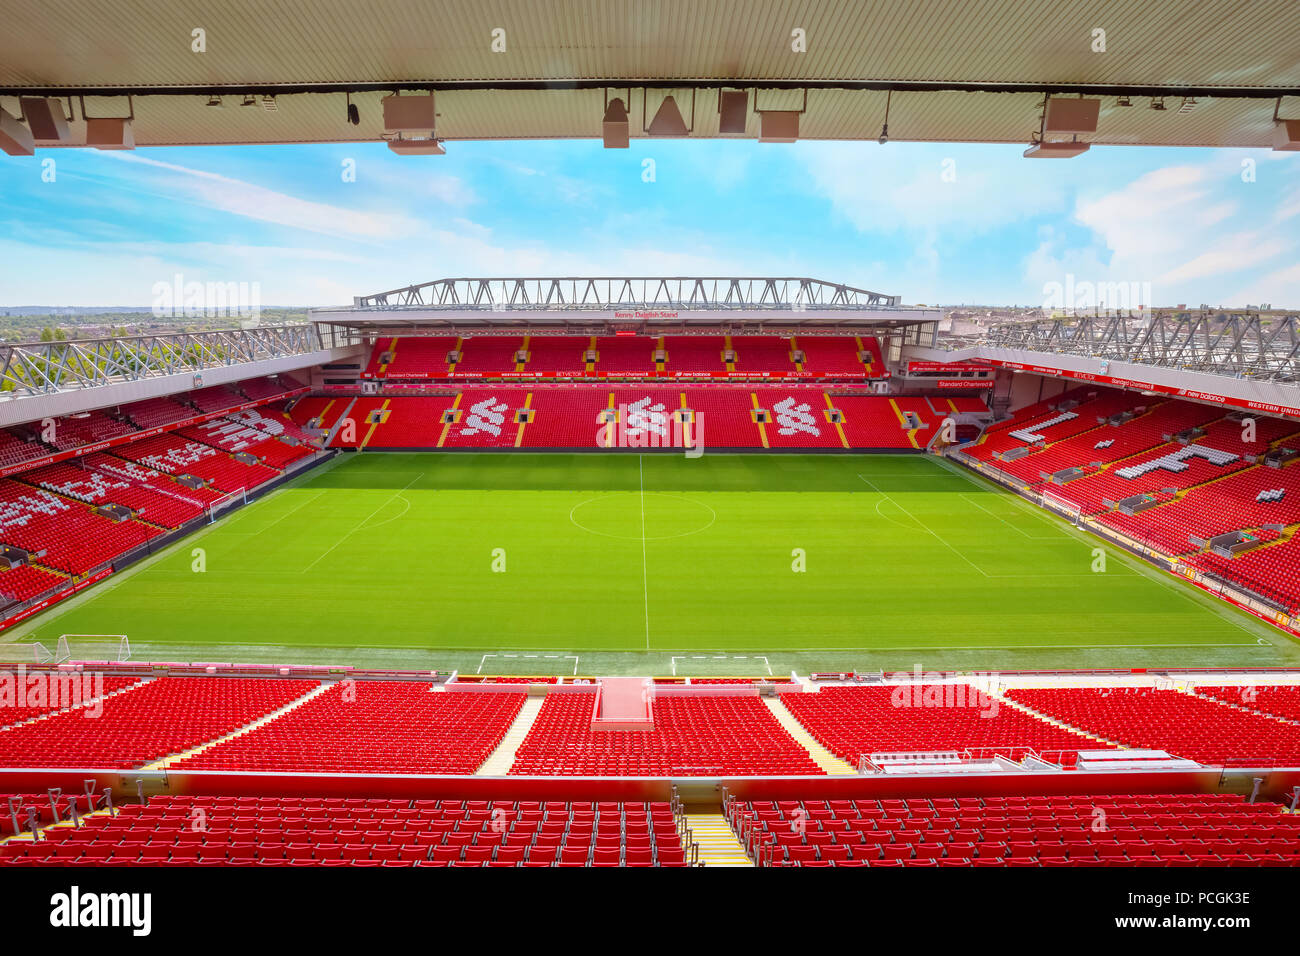 Anfield stadium, the home ground of Liverpool FC in UK ...